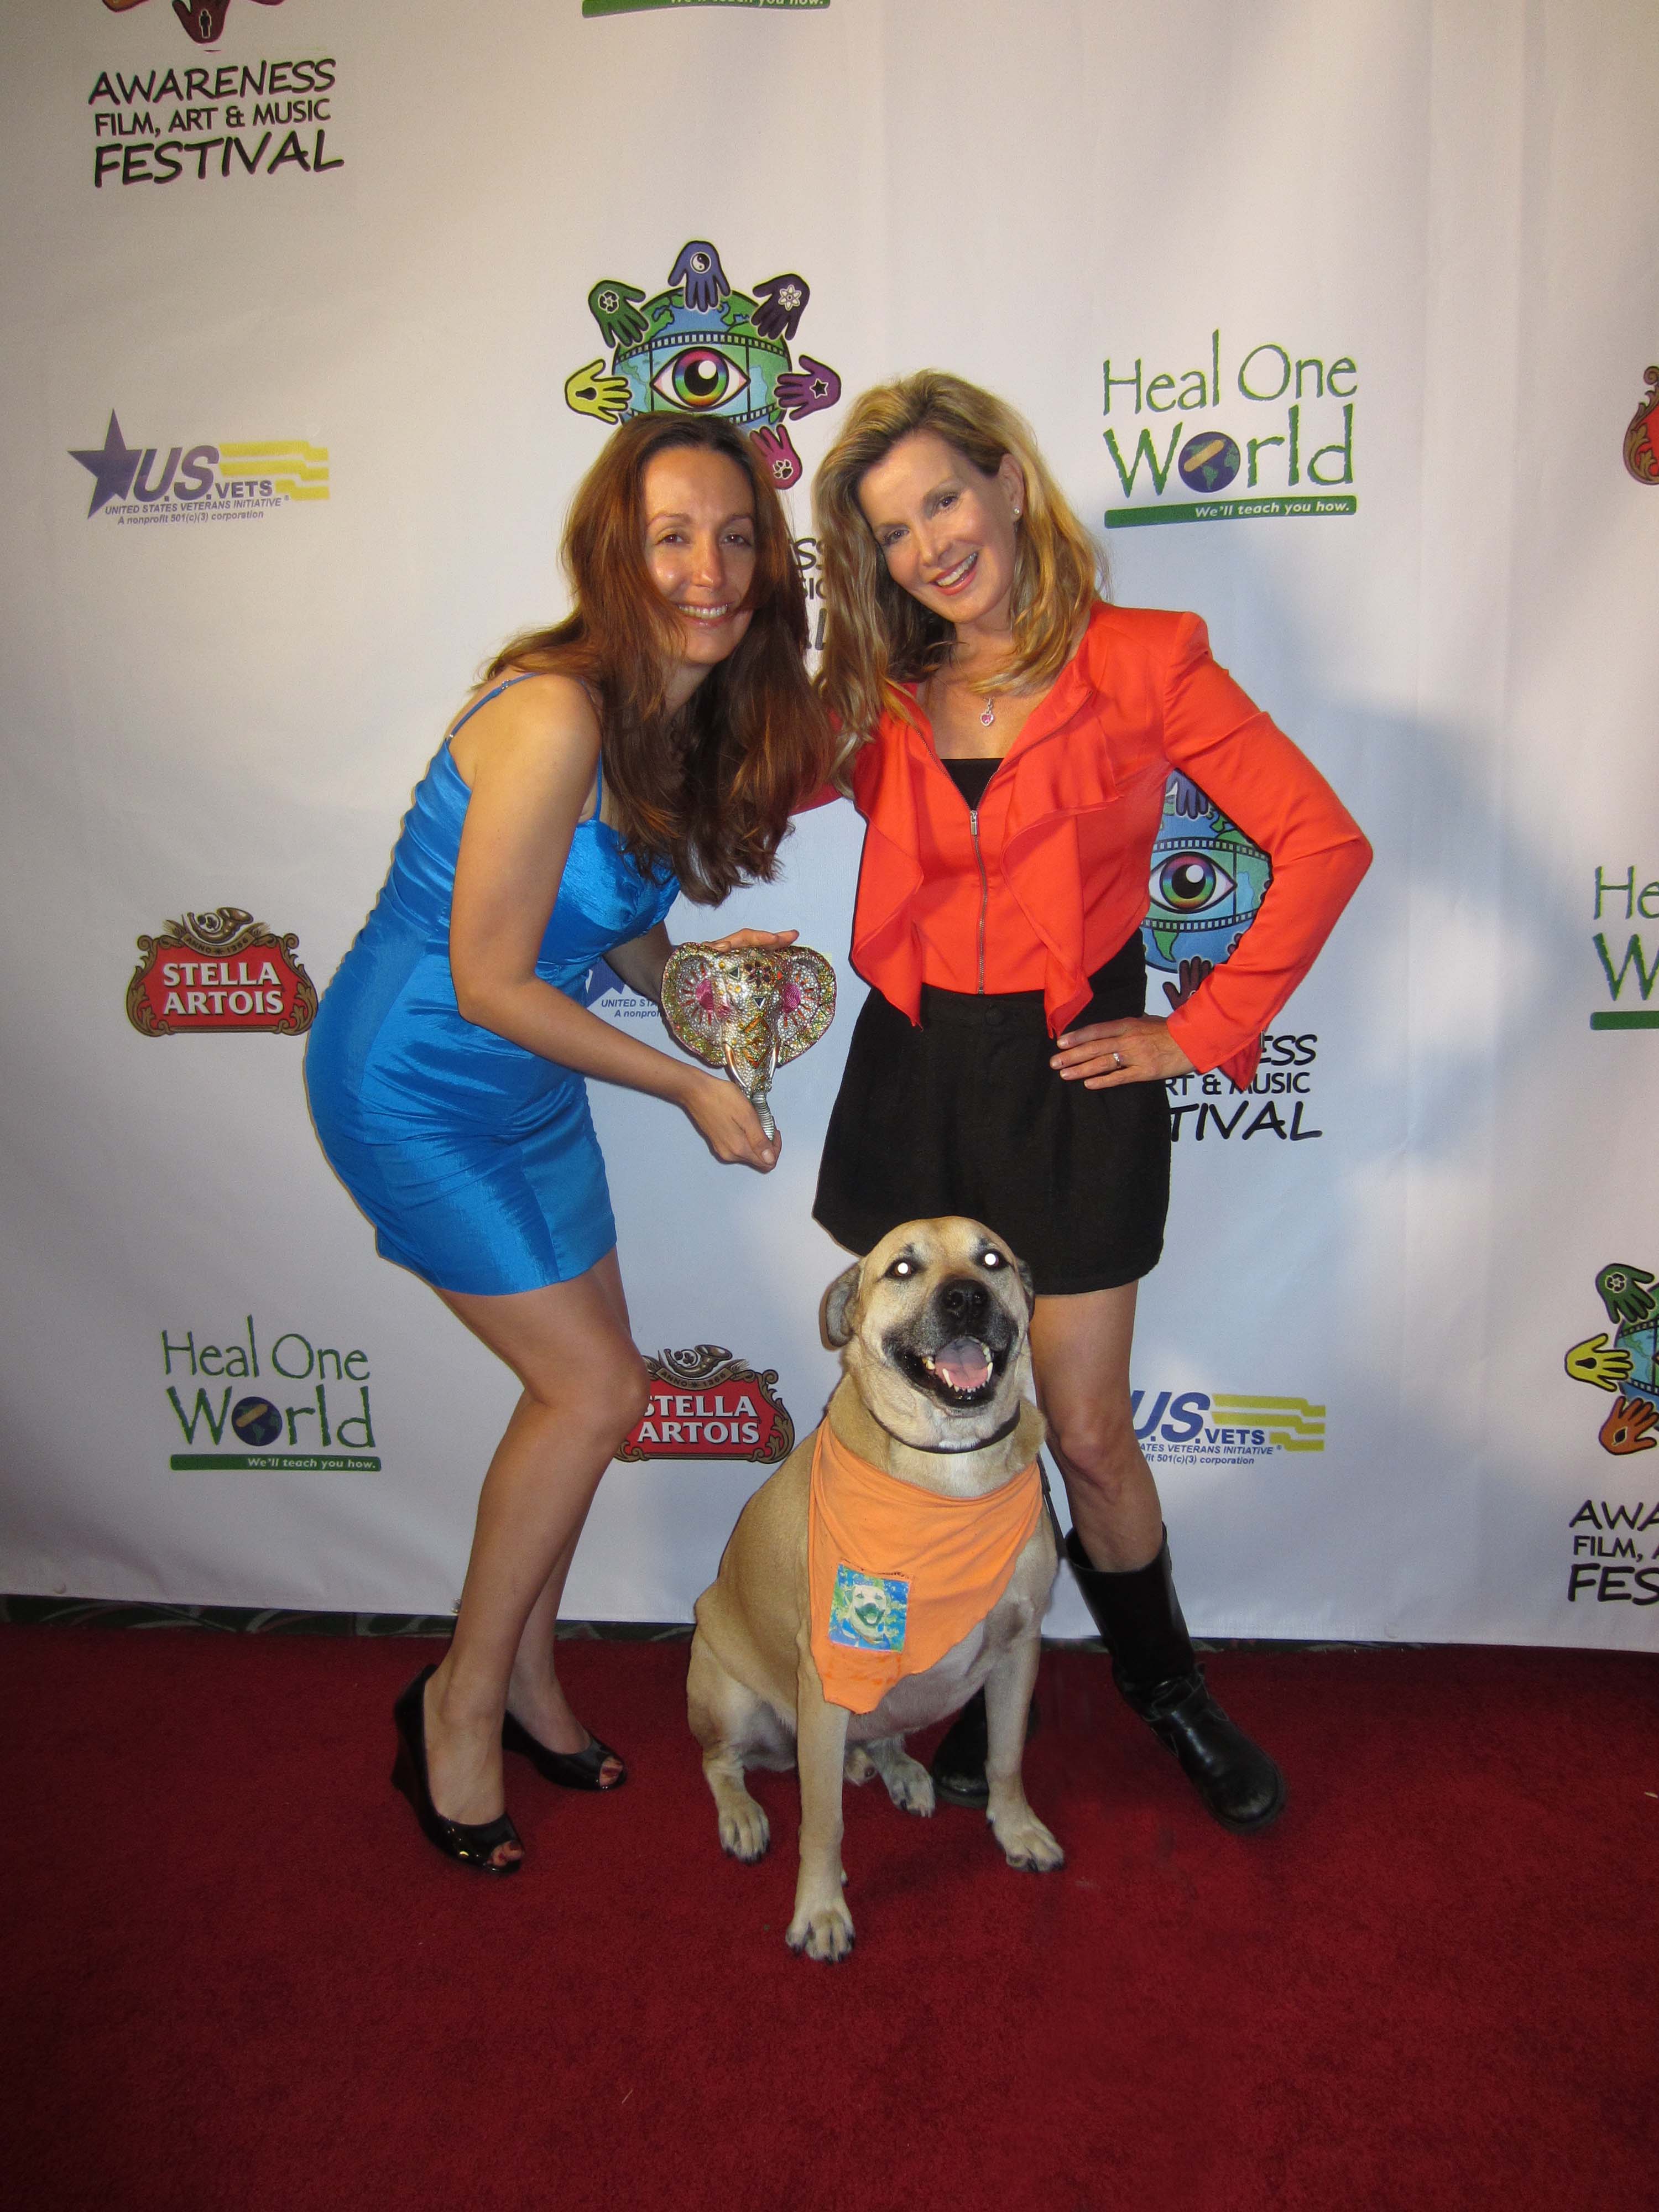 Awareness Film Festival, Megan Blake and Super Smiley, Visionary Award Winners for Super Smiley Flash Mob - A Dogumentary. Super Smiley's Film Debut & Megan's Directoral Debut. Here with Festival Director Skye Kellie. This is